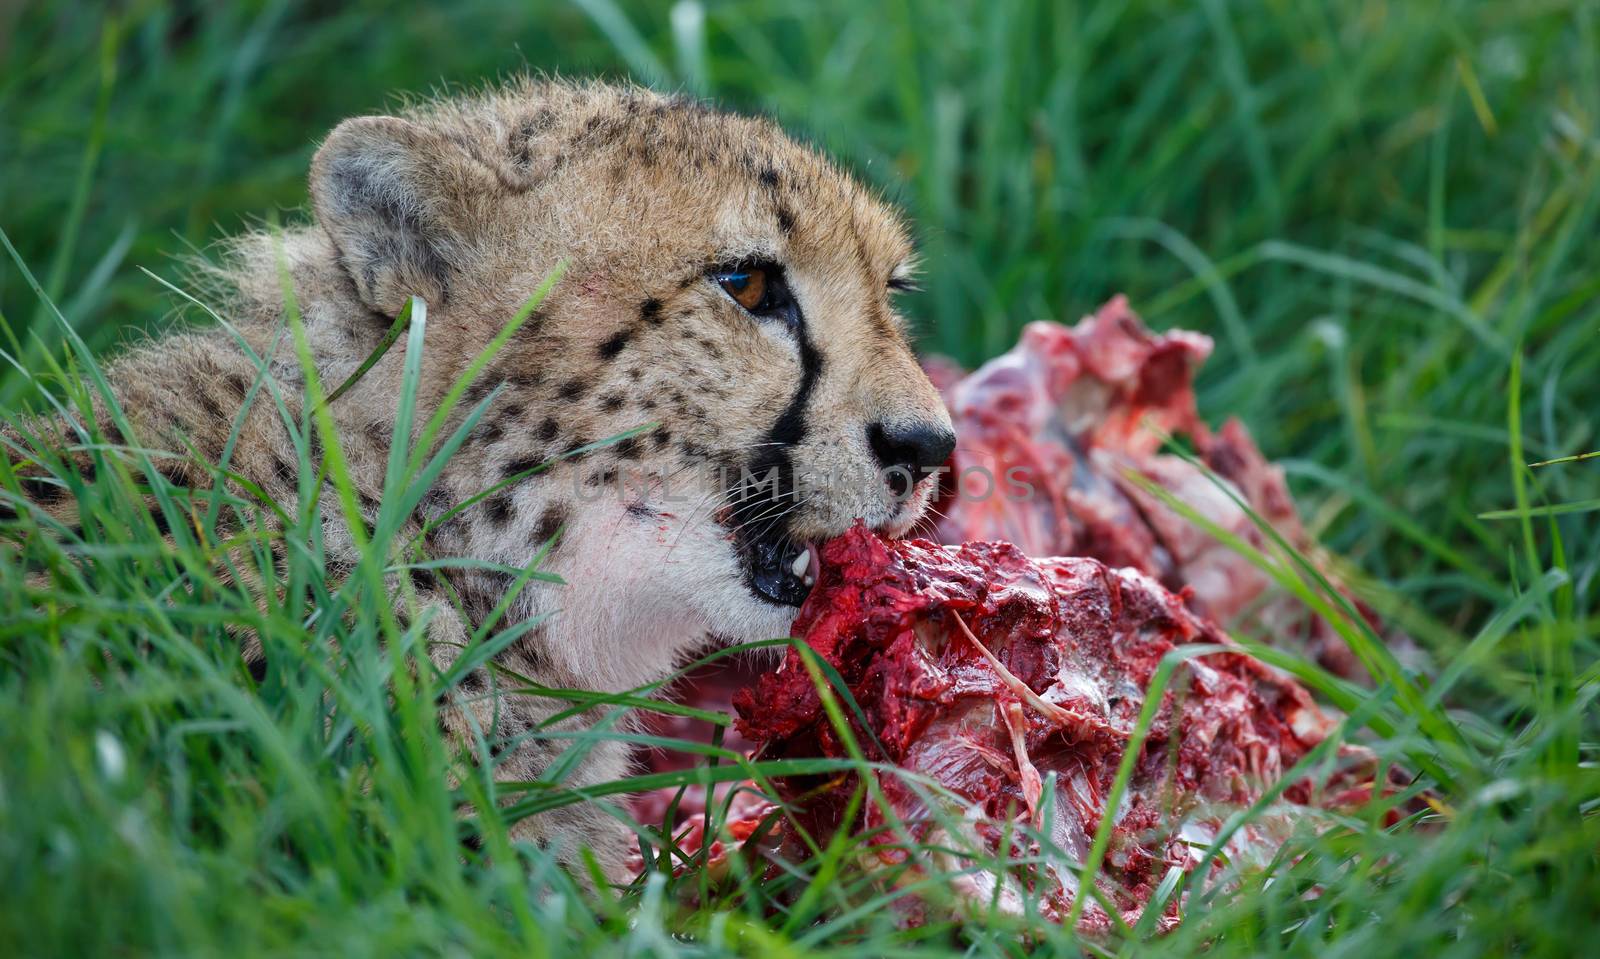 Cheetah wild cat eating from a feshly killed animal